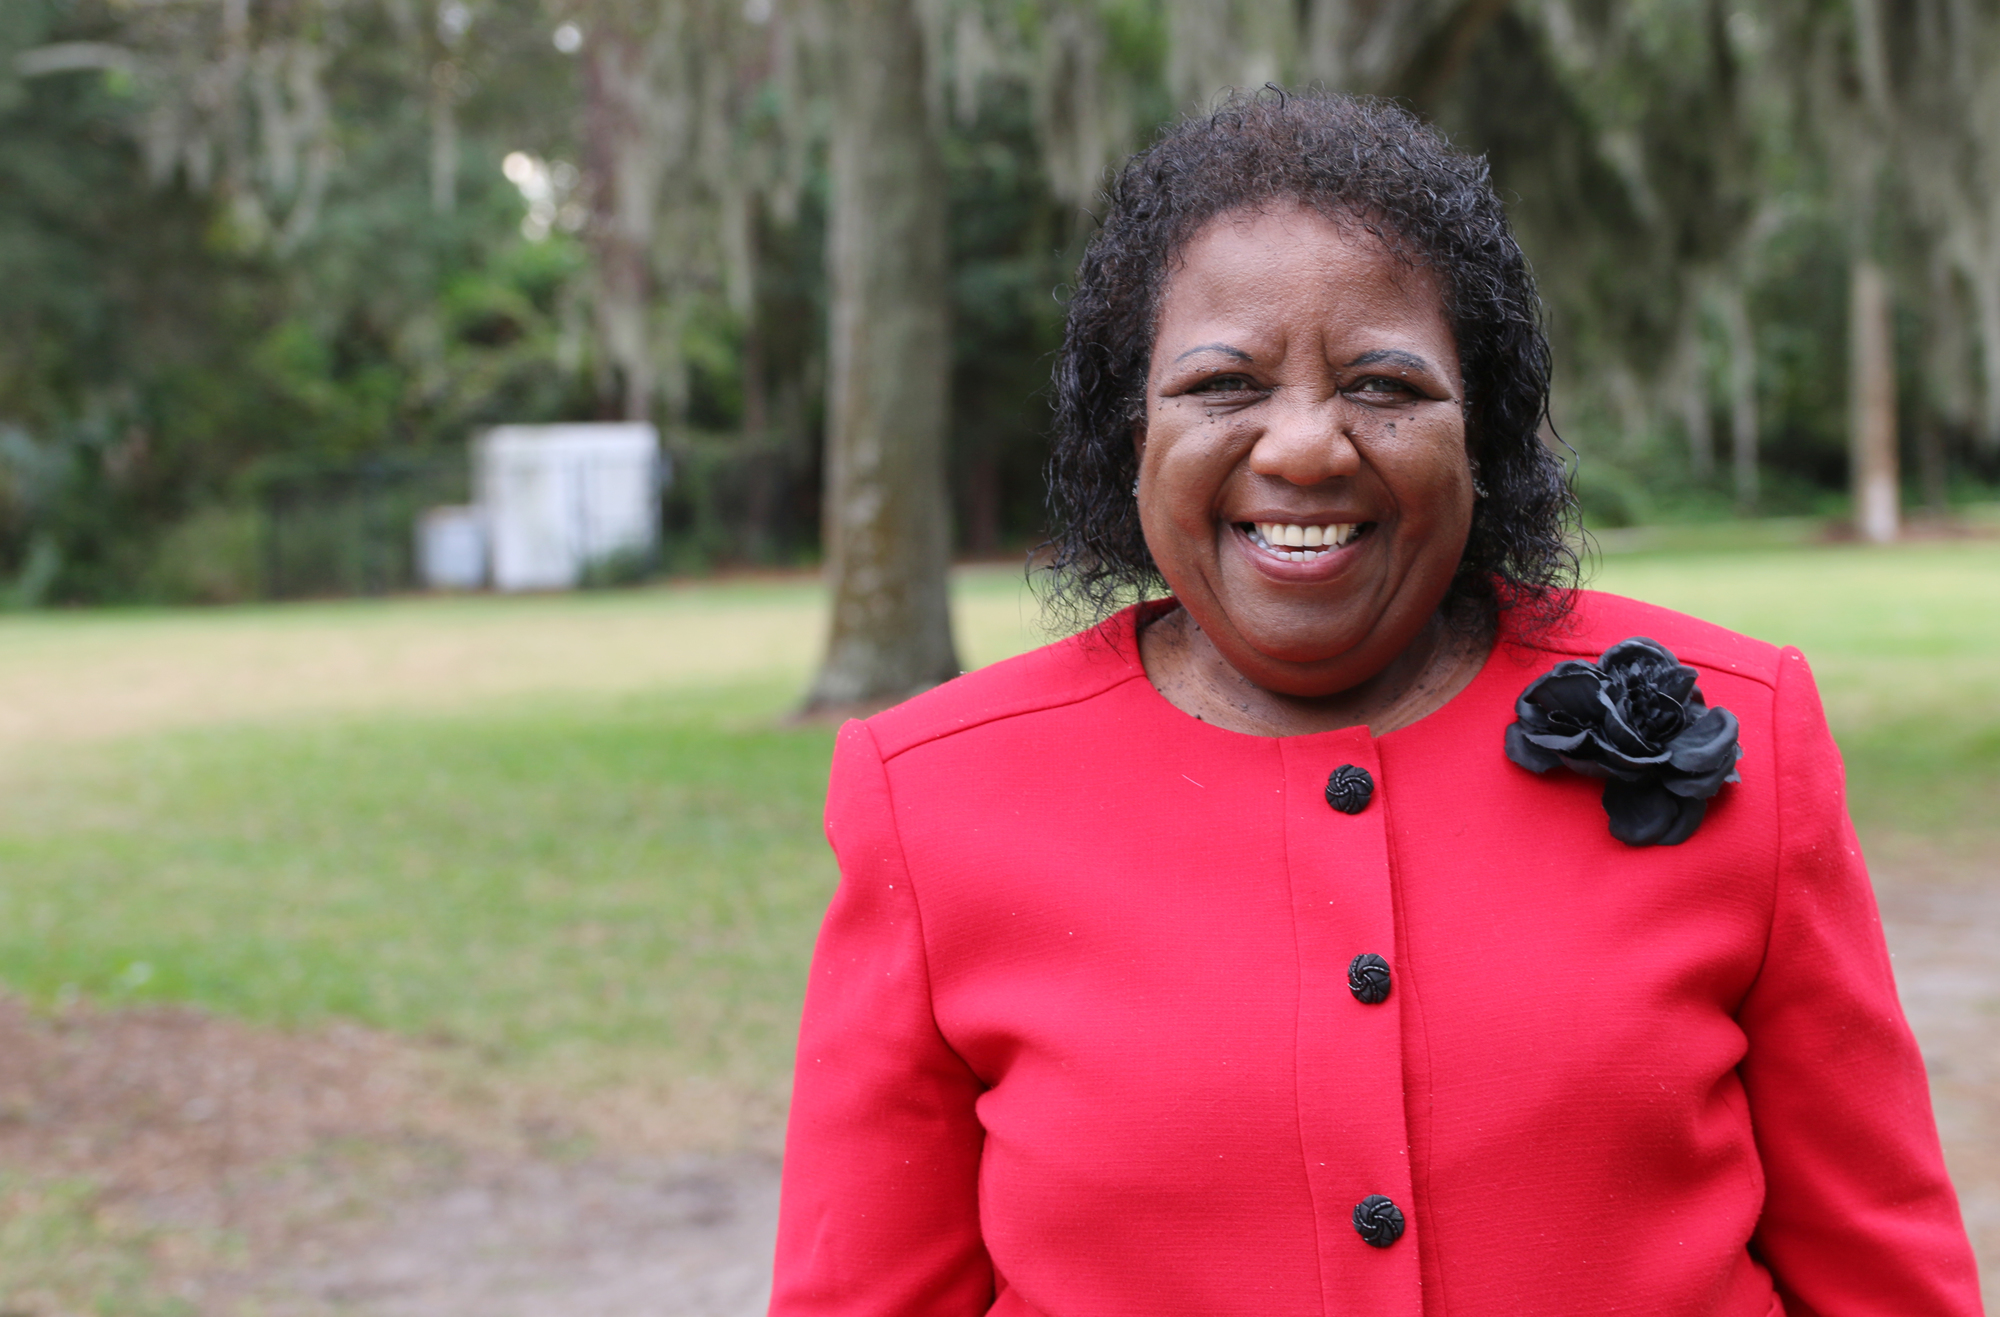 Erlene Turner, one of our Standing O nominees from 2020, nominated Deborah Hamm for this year's recognition. File photo